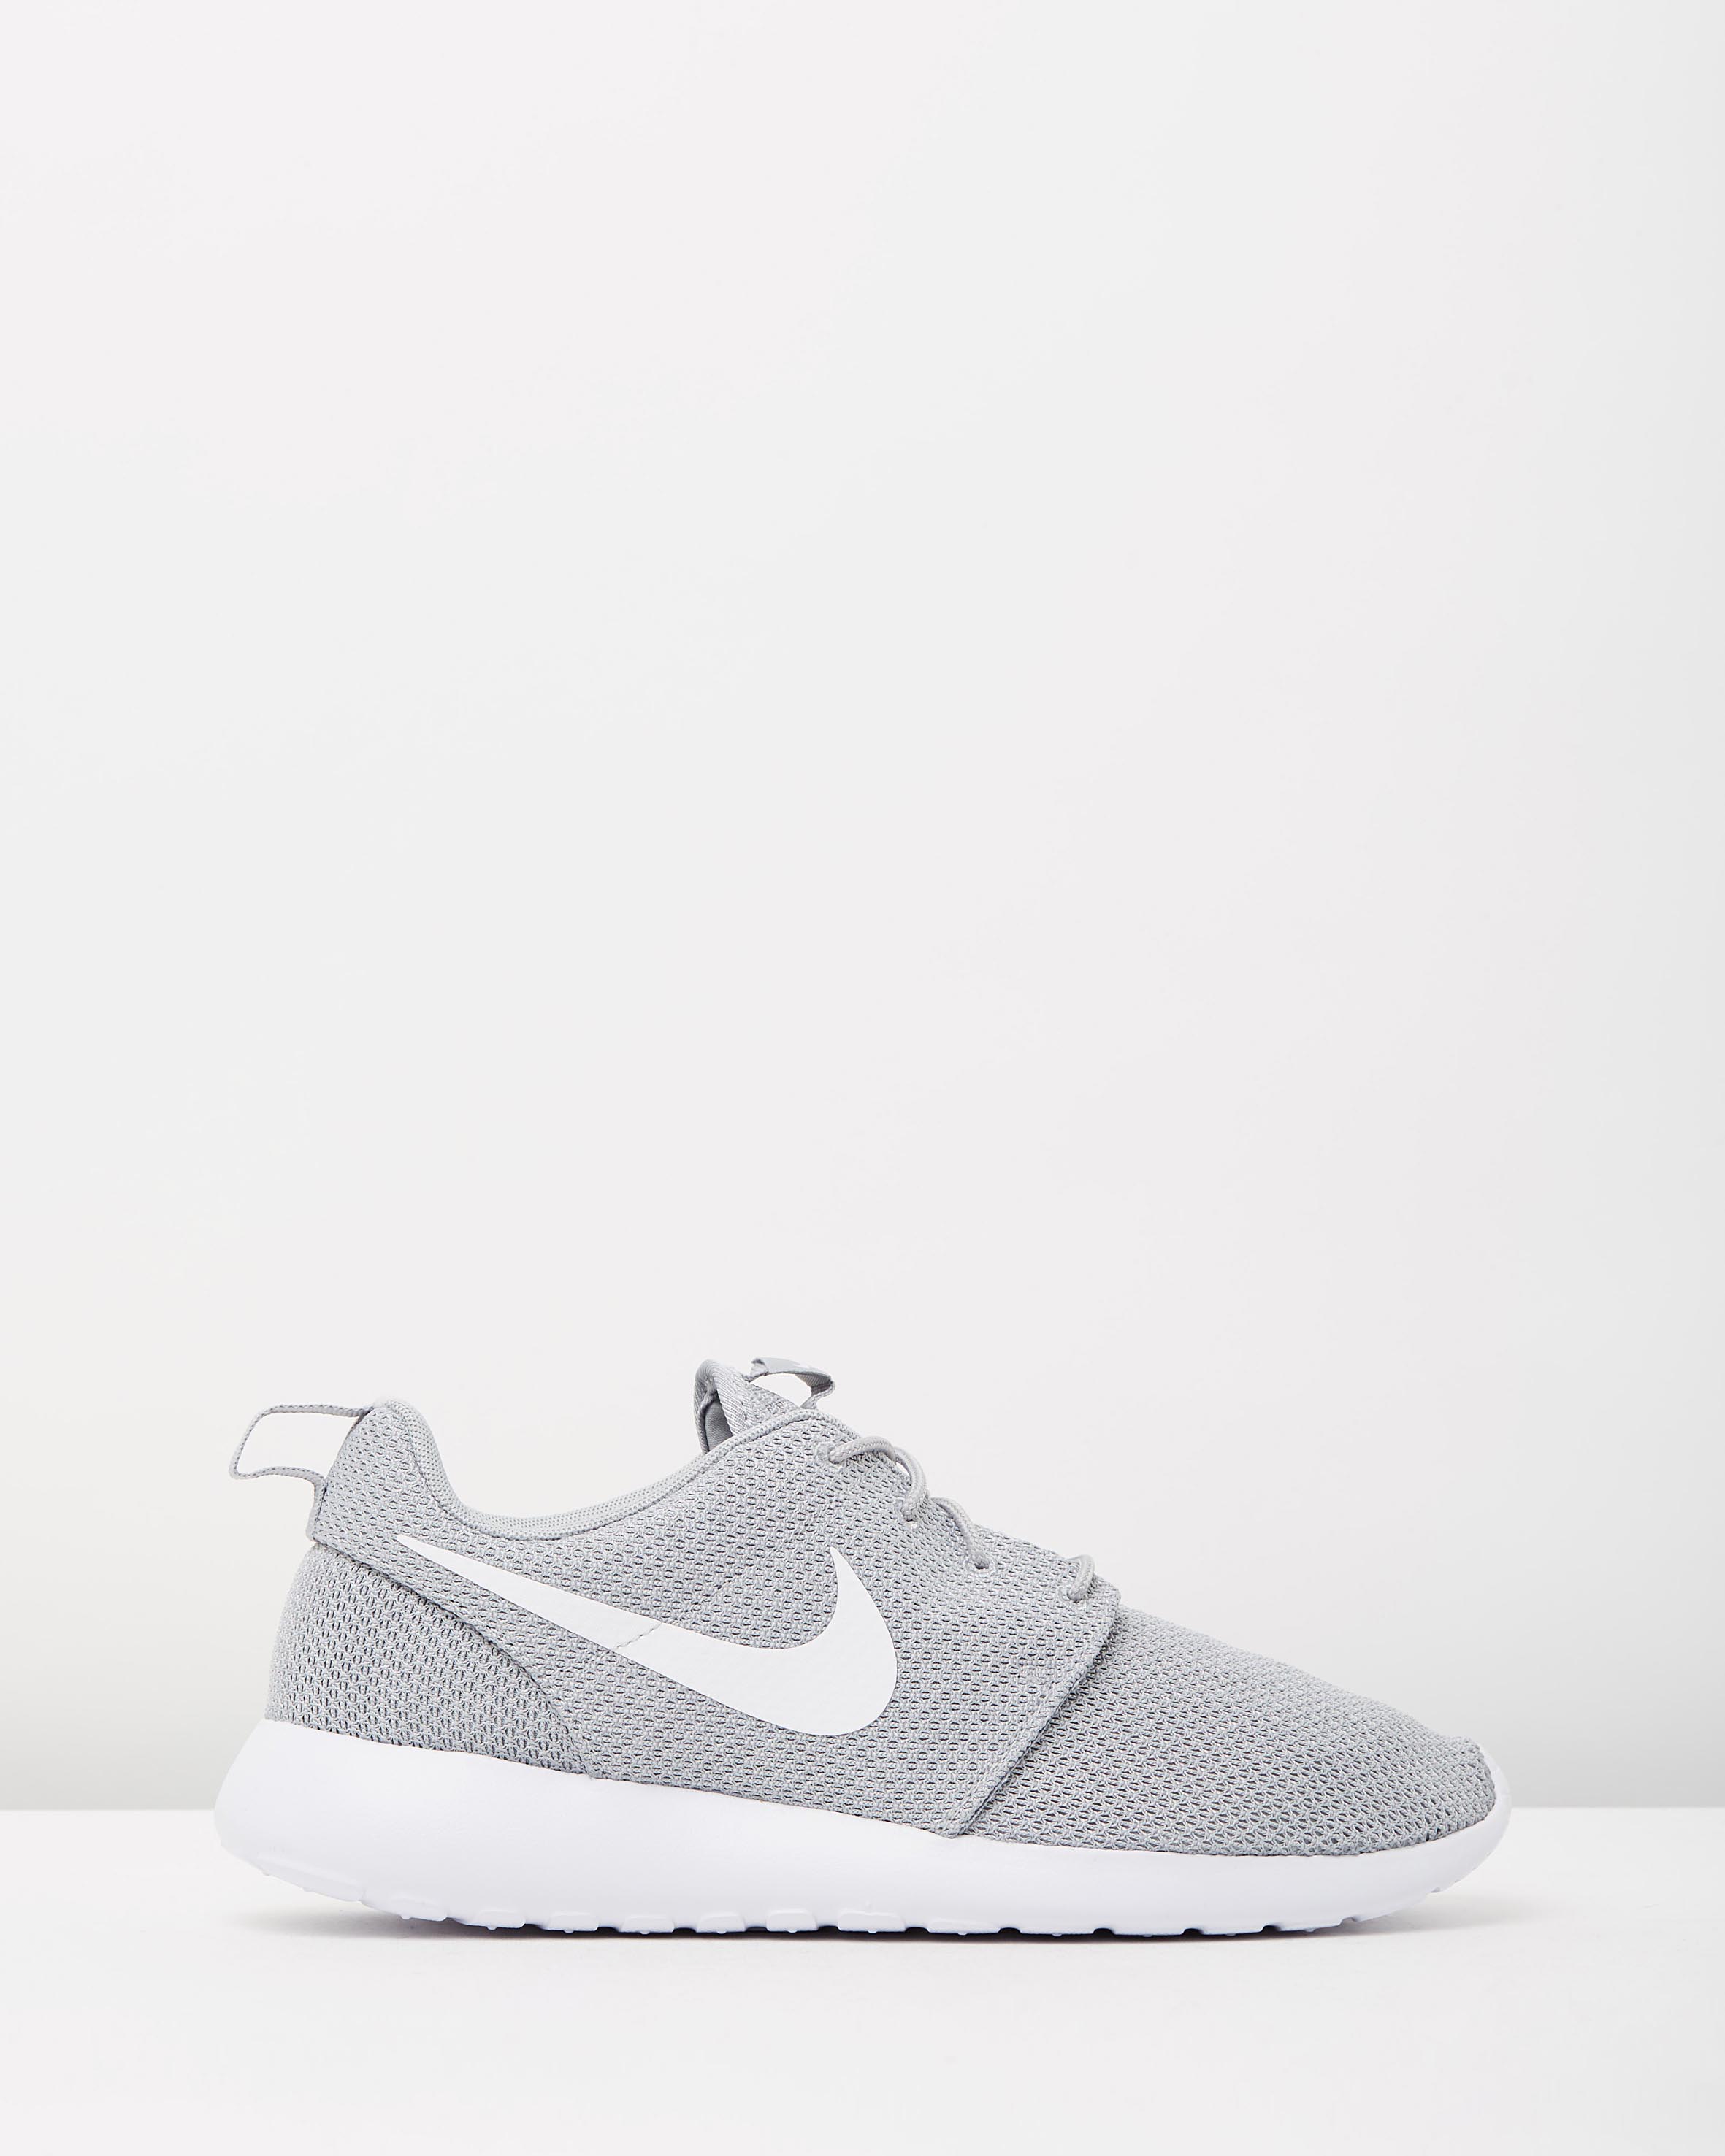 grey and white roshes